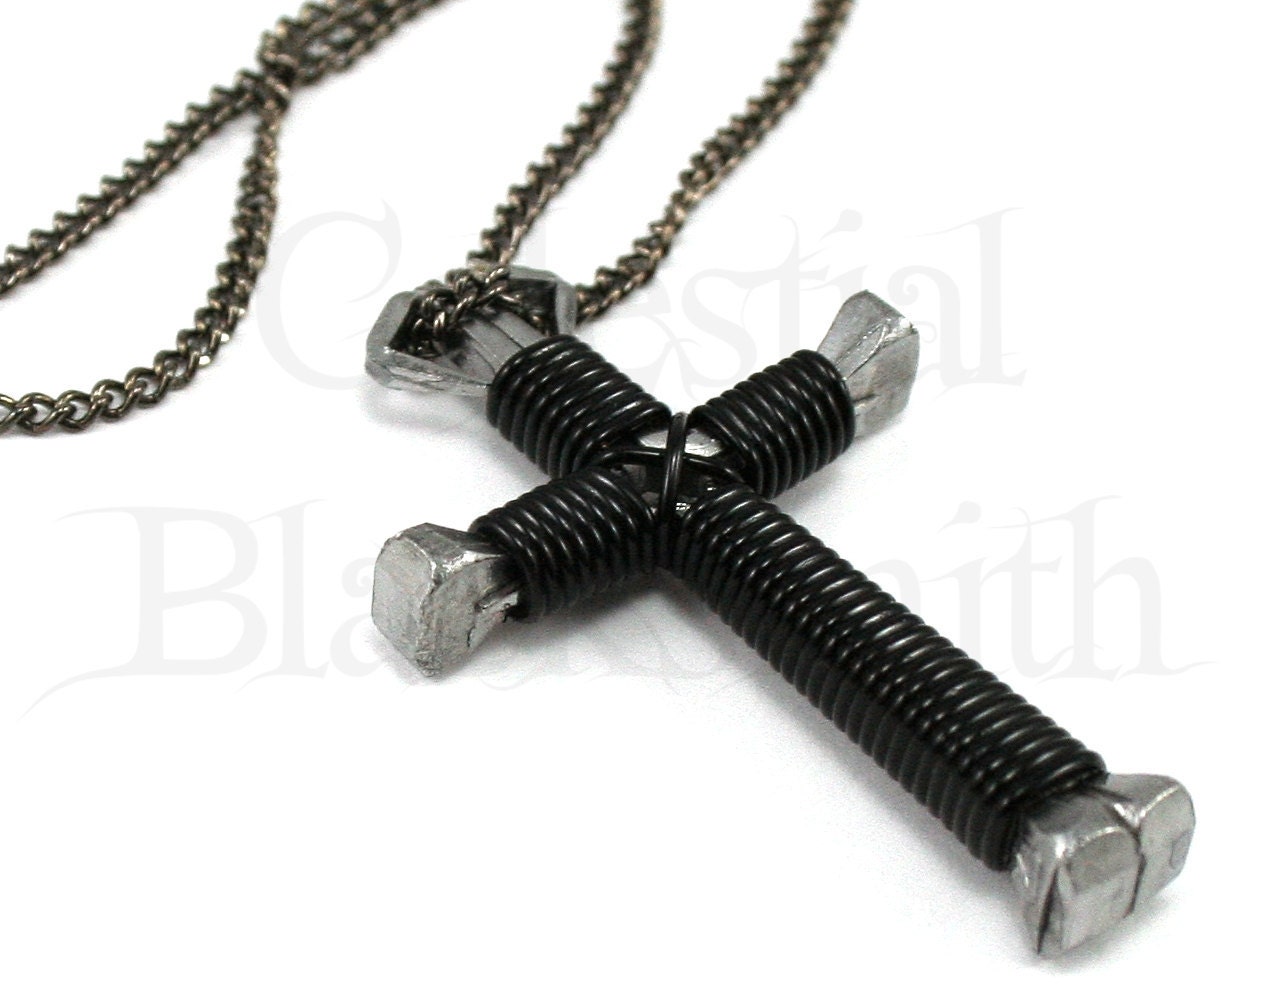 Nail Cross Necklace on Black Cross Necklace   Black Wire Wrapped Horseshoe Nail Cross Pendant